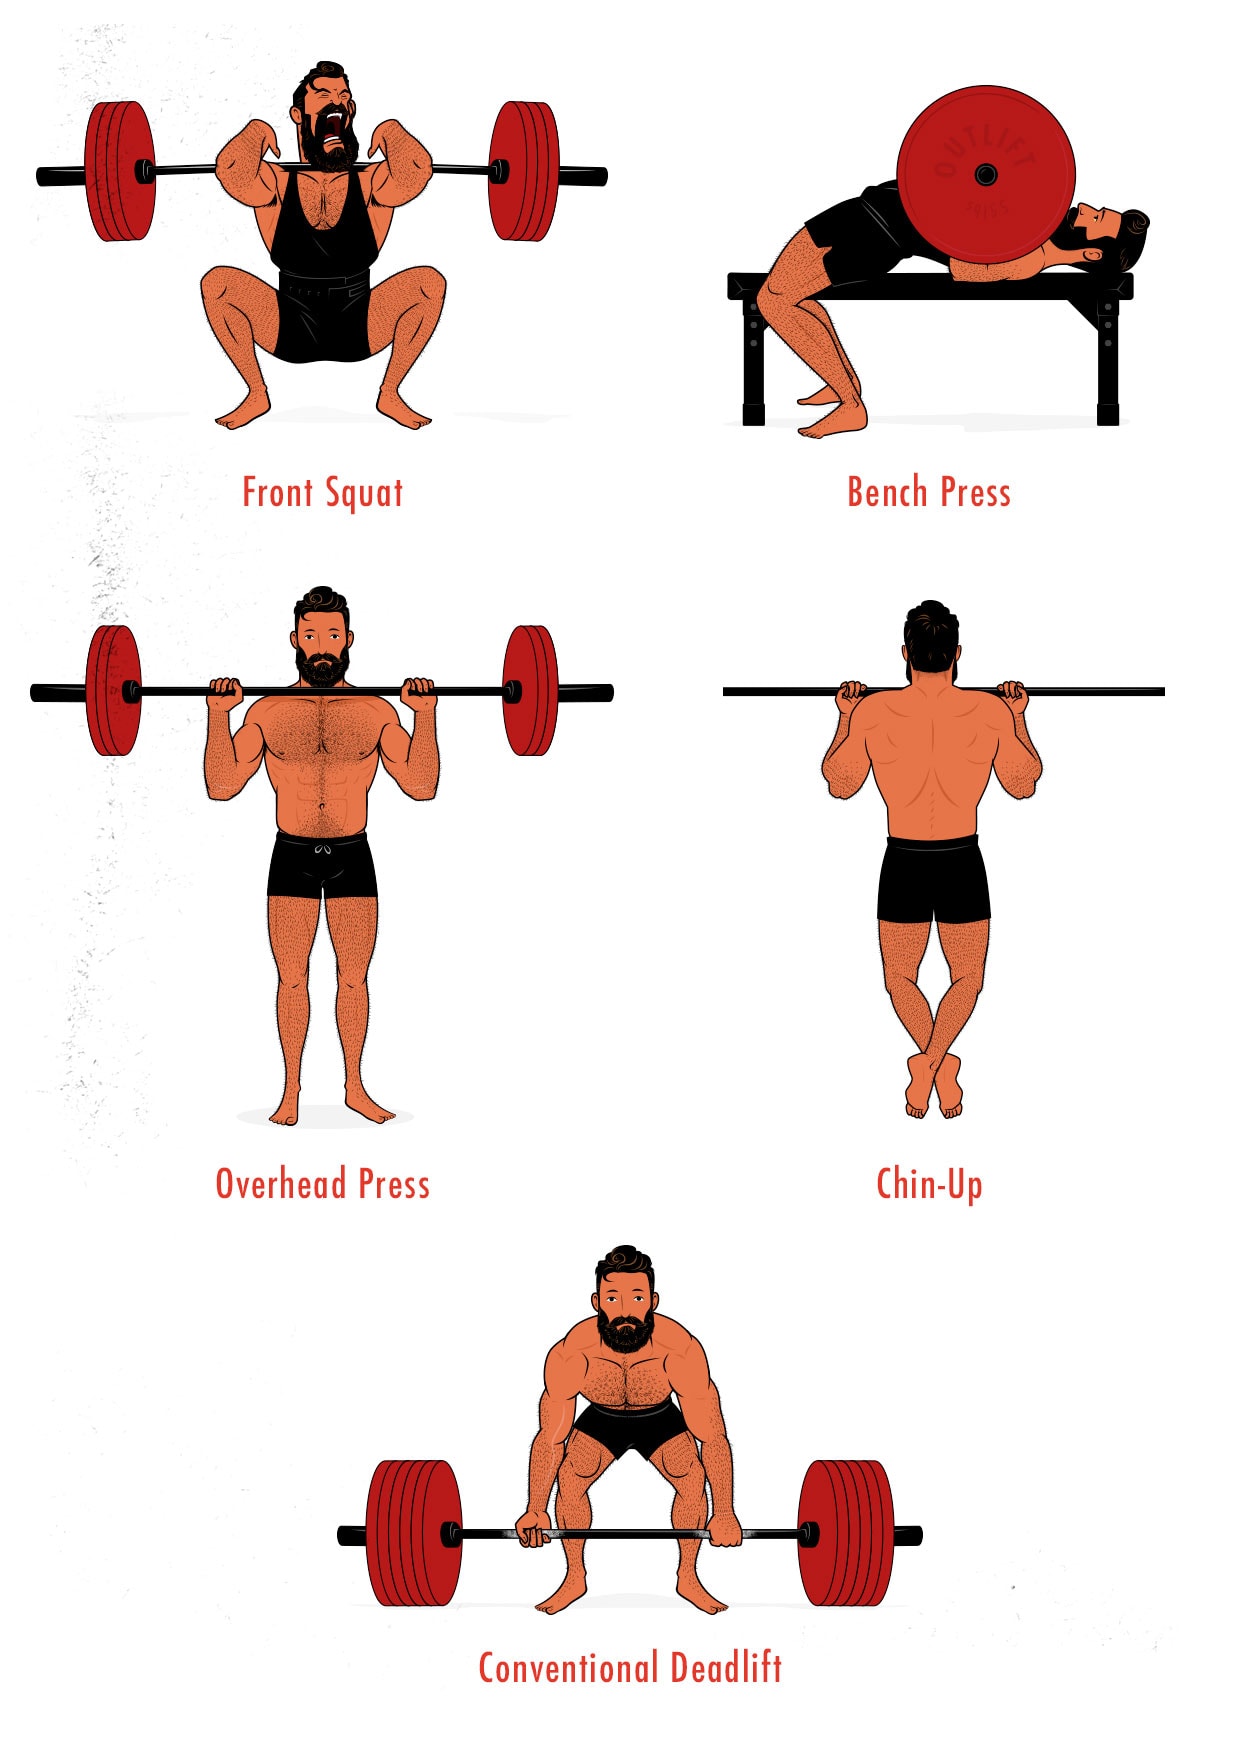 Illustration showing the 5 best compound barbell lifts for gaining muscle mass.